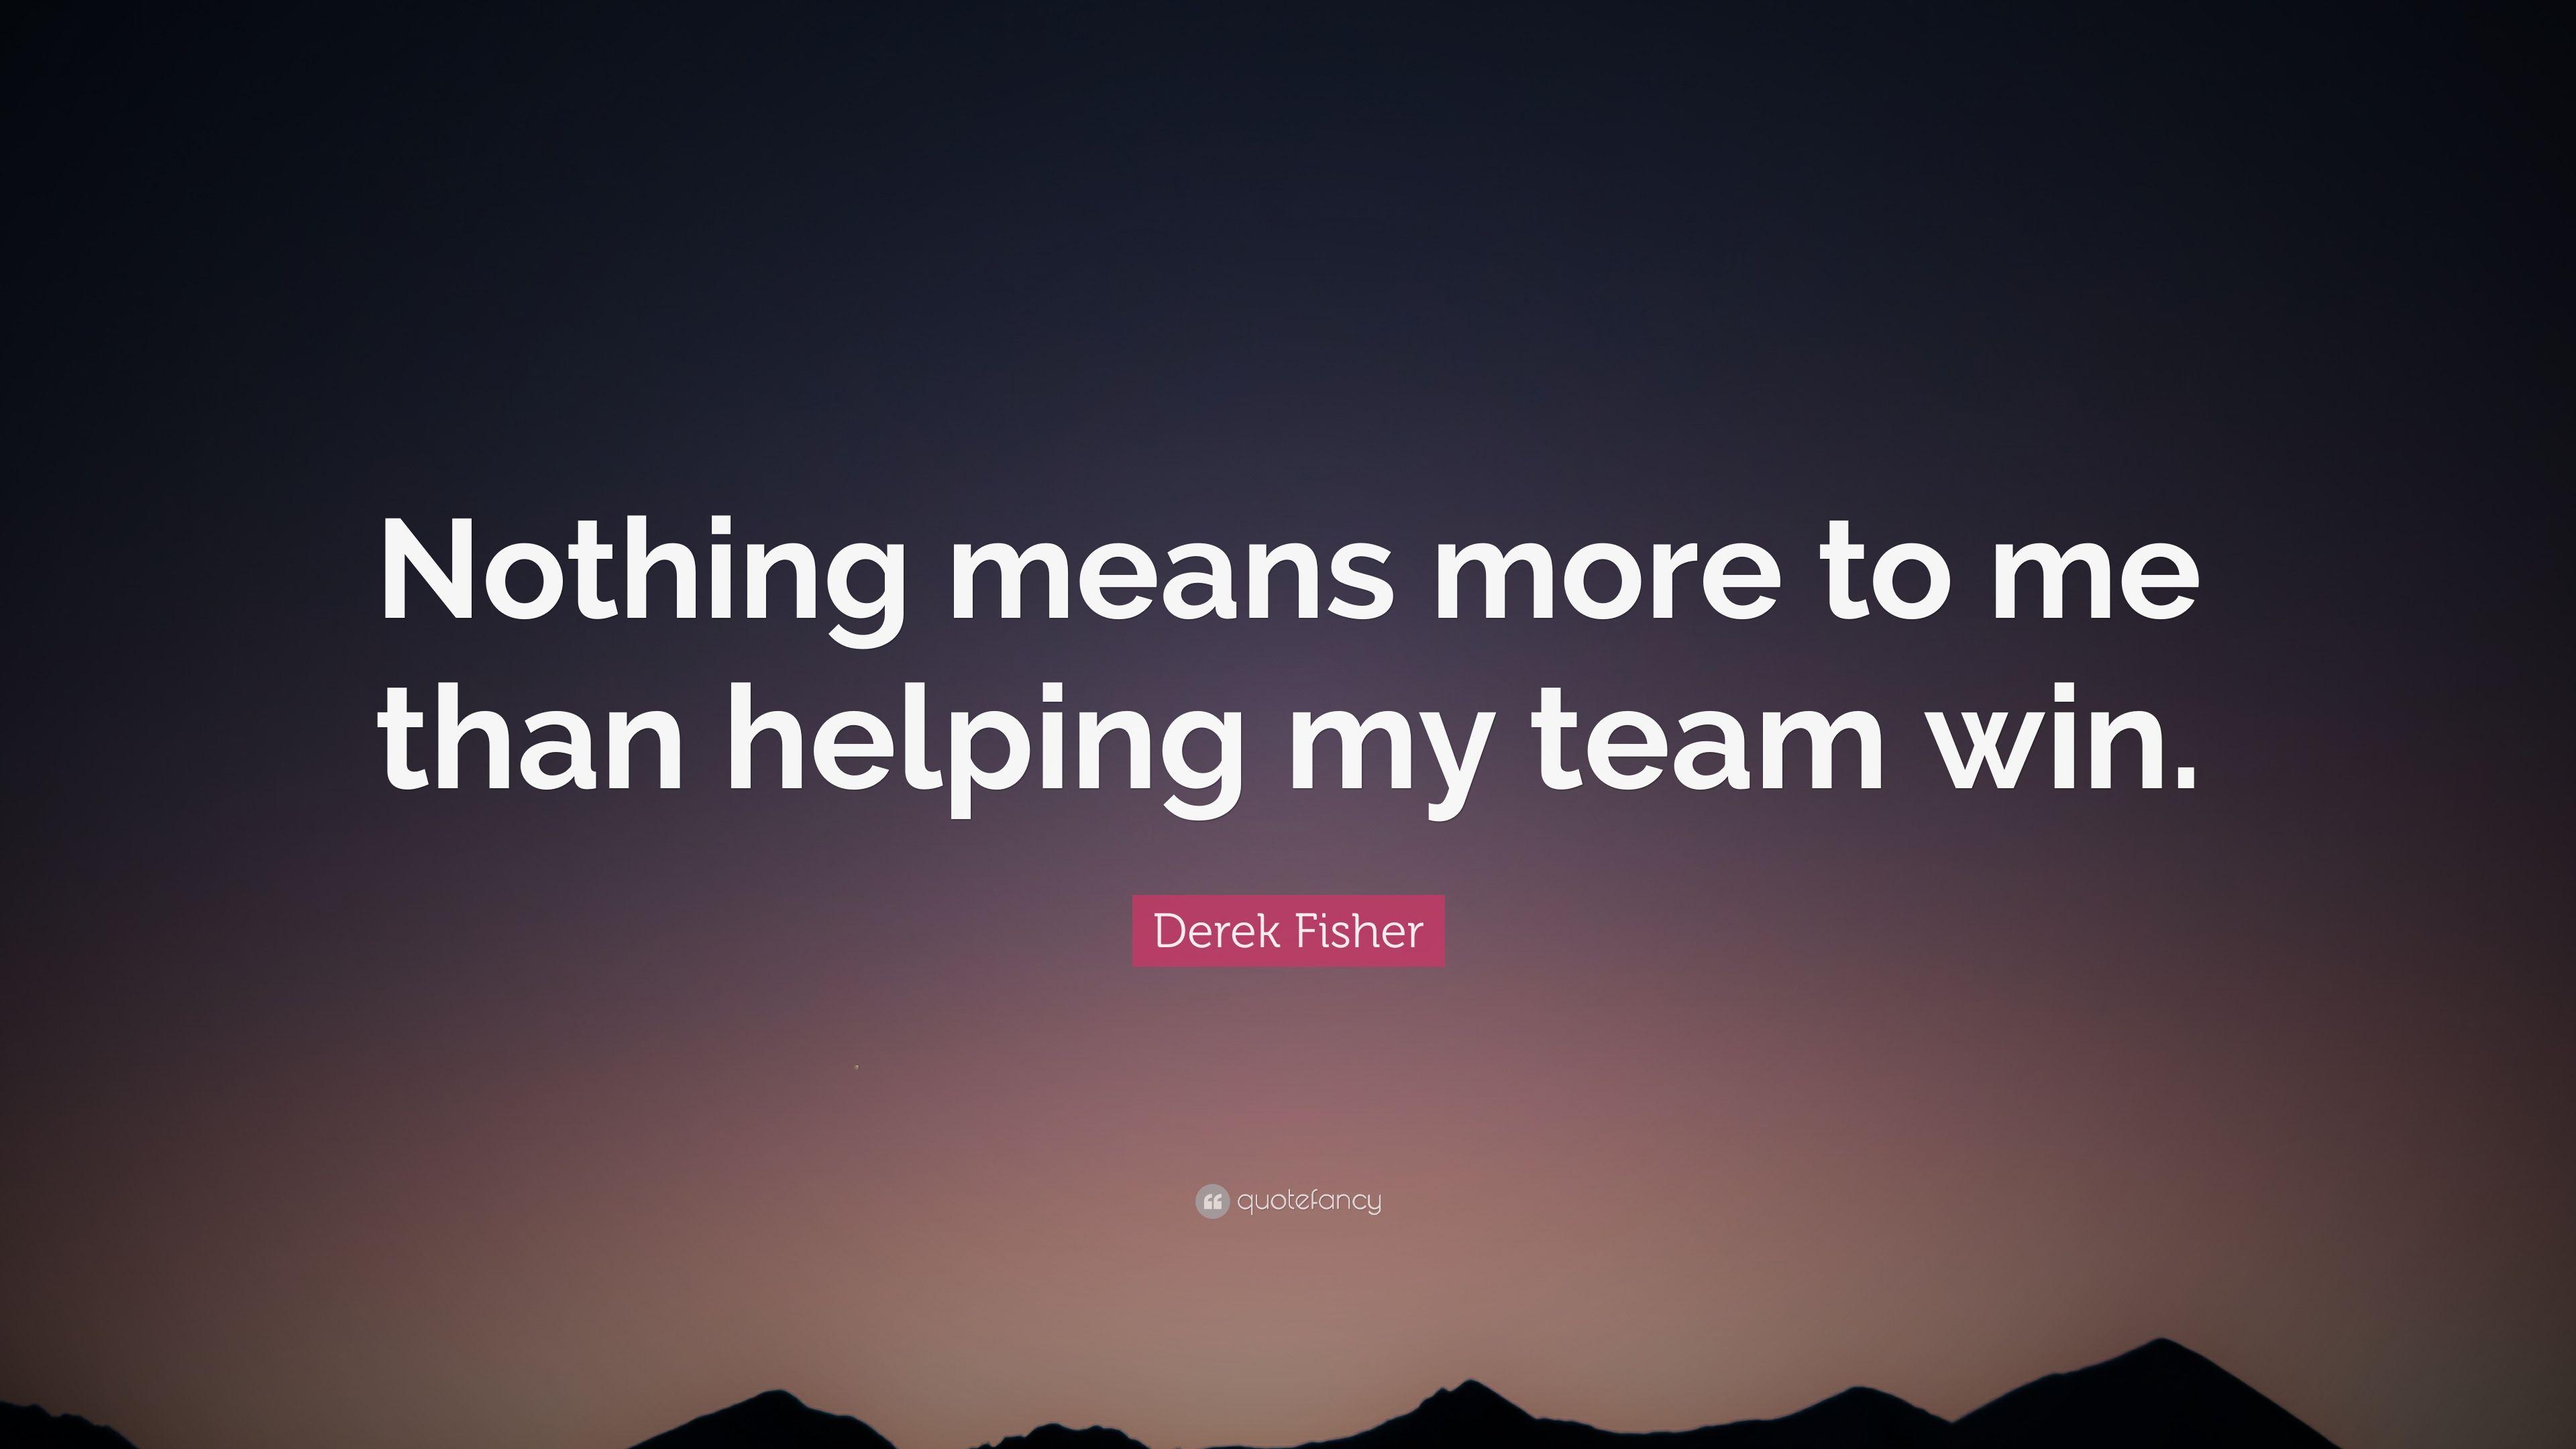 Derek Fisher Quote: “Nothing means more to me than helping my team